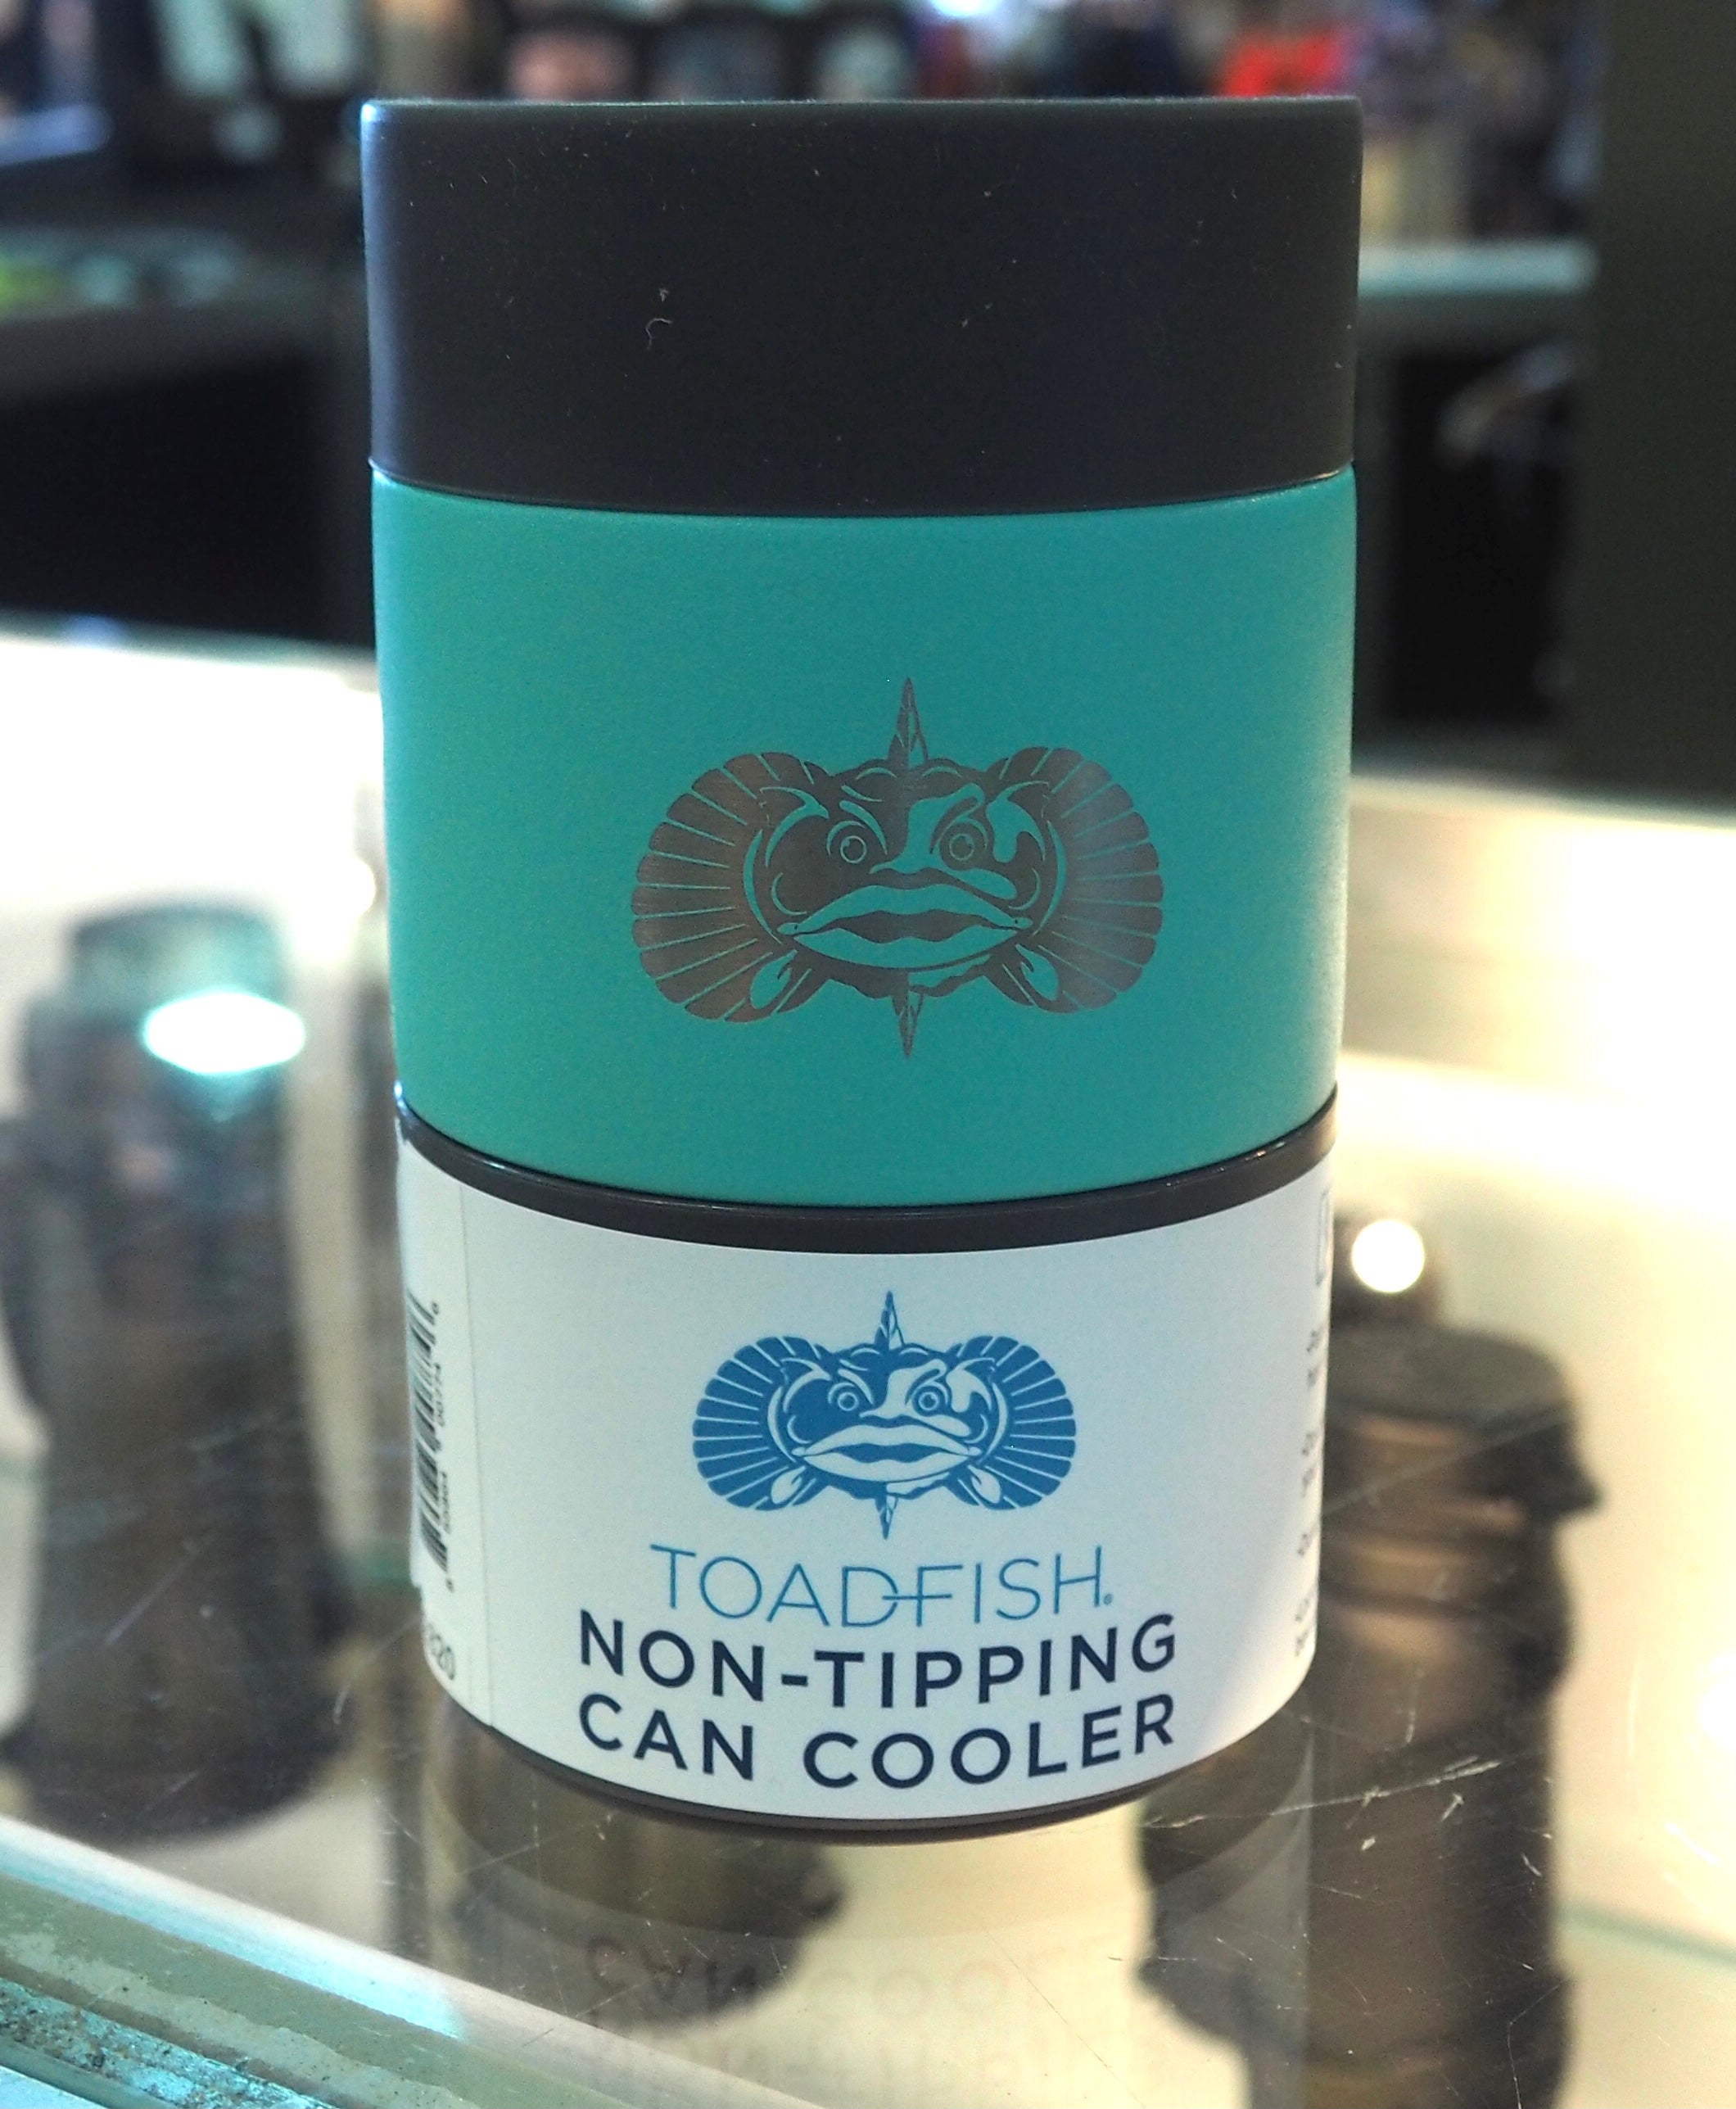 *Toadfish Non-Tipping Can Cooler Teal